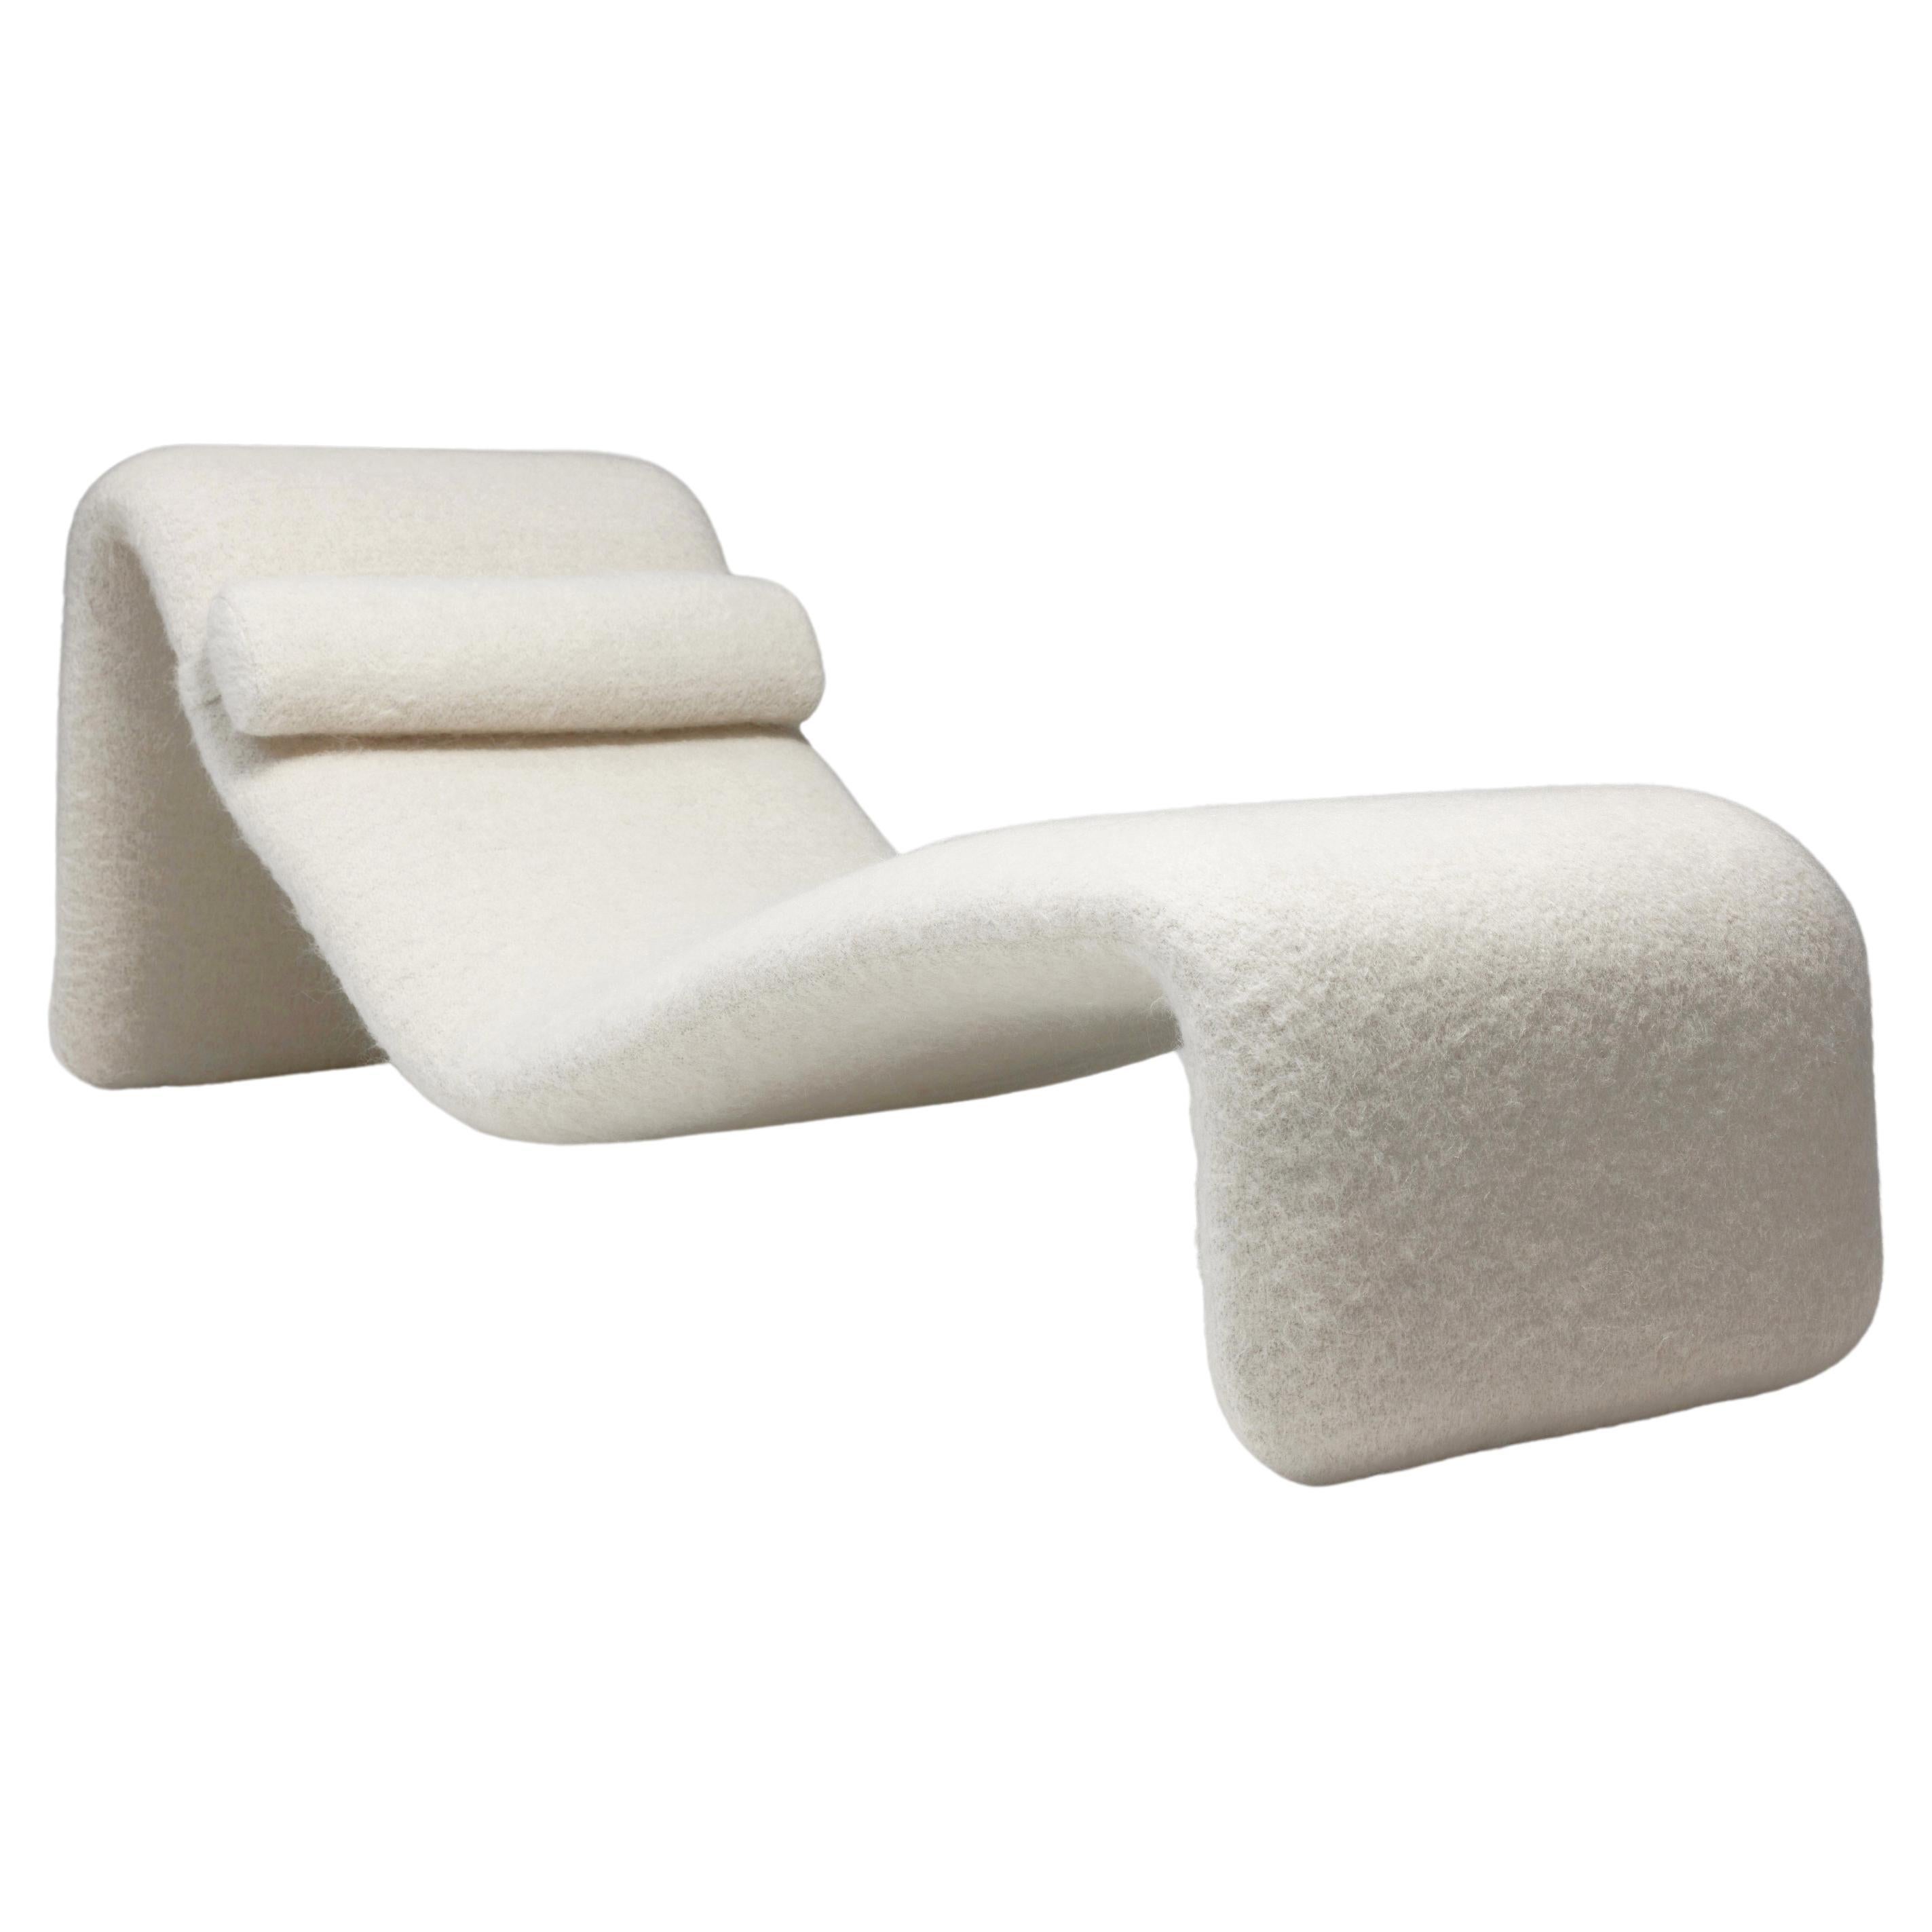 Olivier Mourgue Djinn Chaise Lounge for Airborne in Beautiful Pierre Frey Fabric